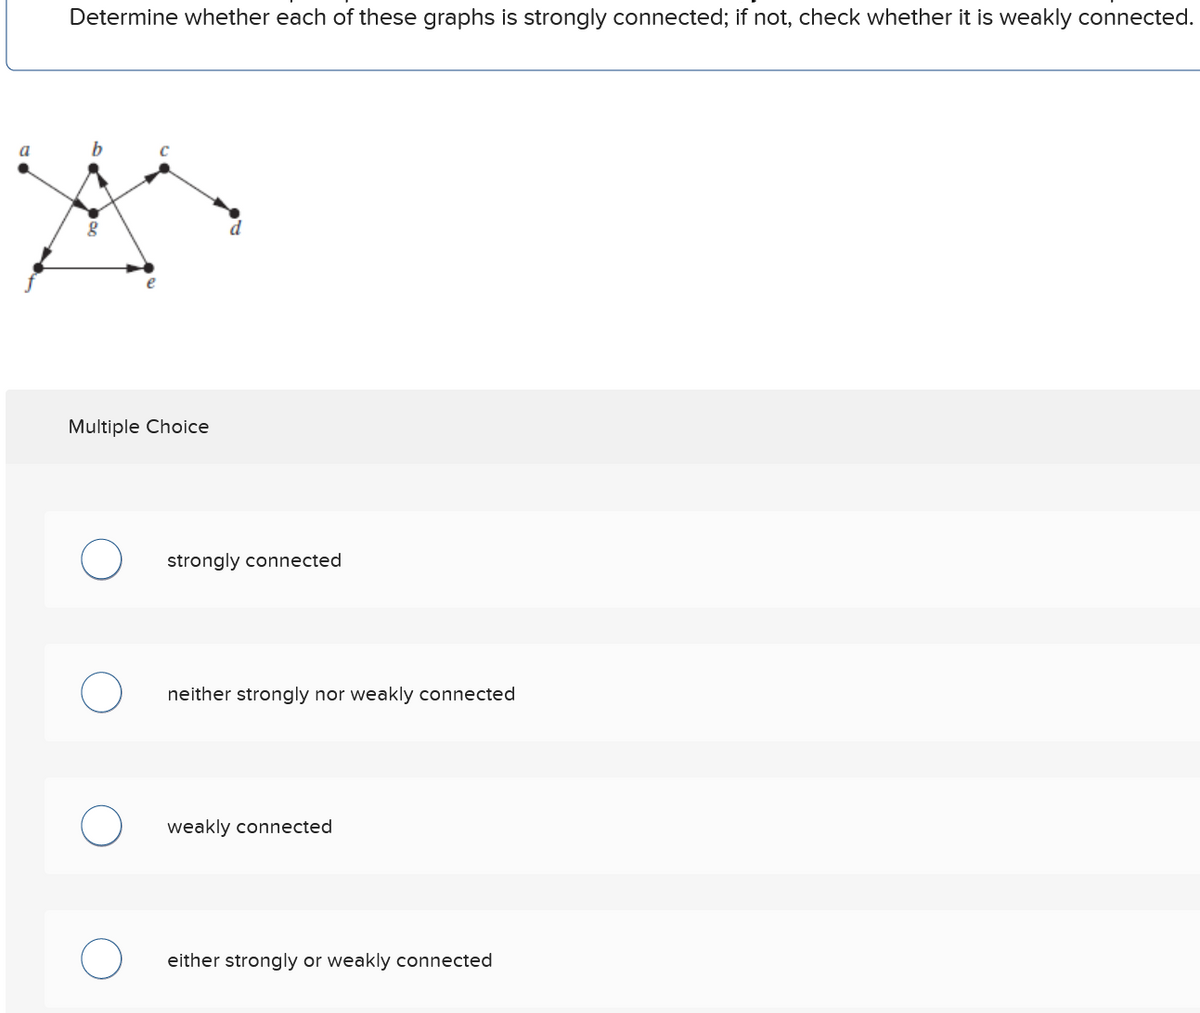 a
Determine whether each of these graphs is strongly connected; if not, check whether it is weakly connected.
g
Multiple Choice
strongly connected
neither strongly nor weakly connected
weakly connected
either strongly or weakly connected